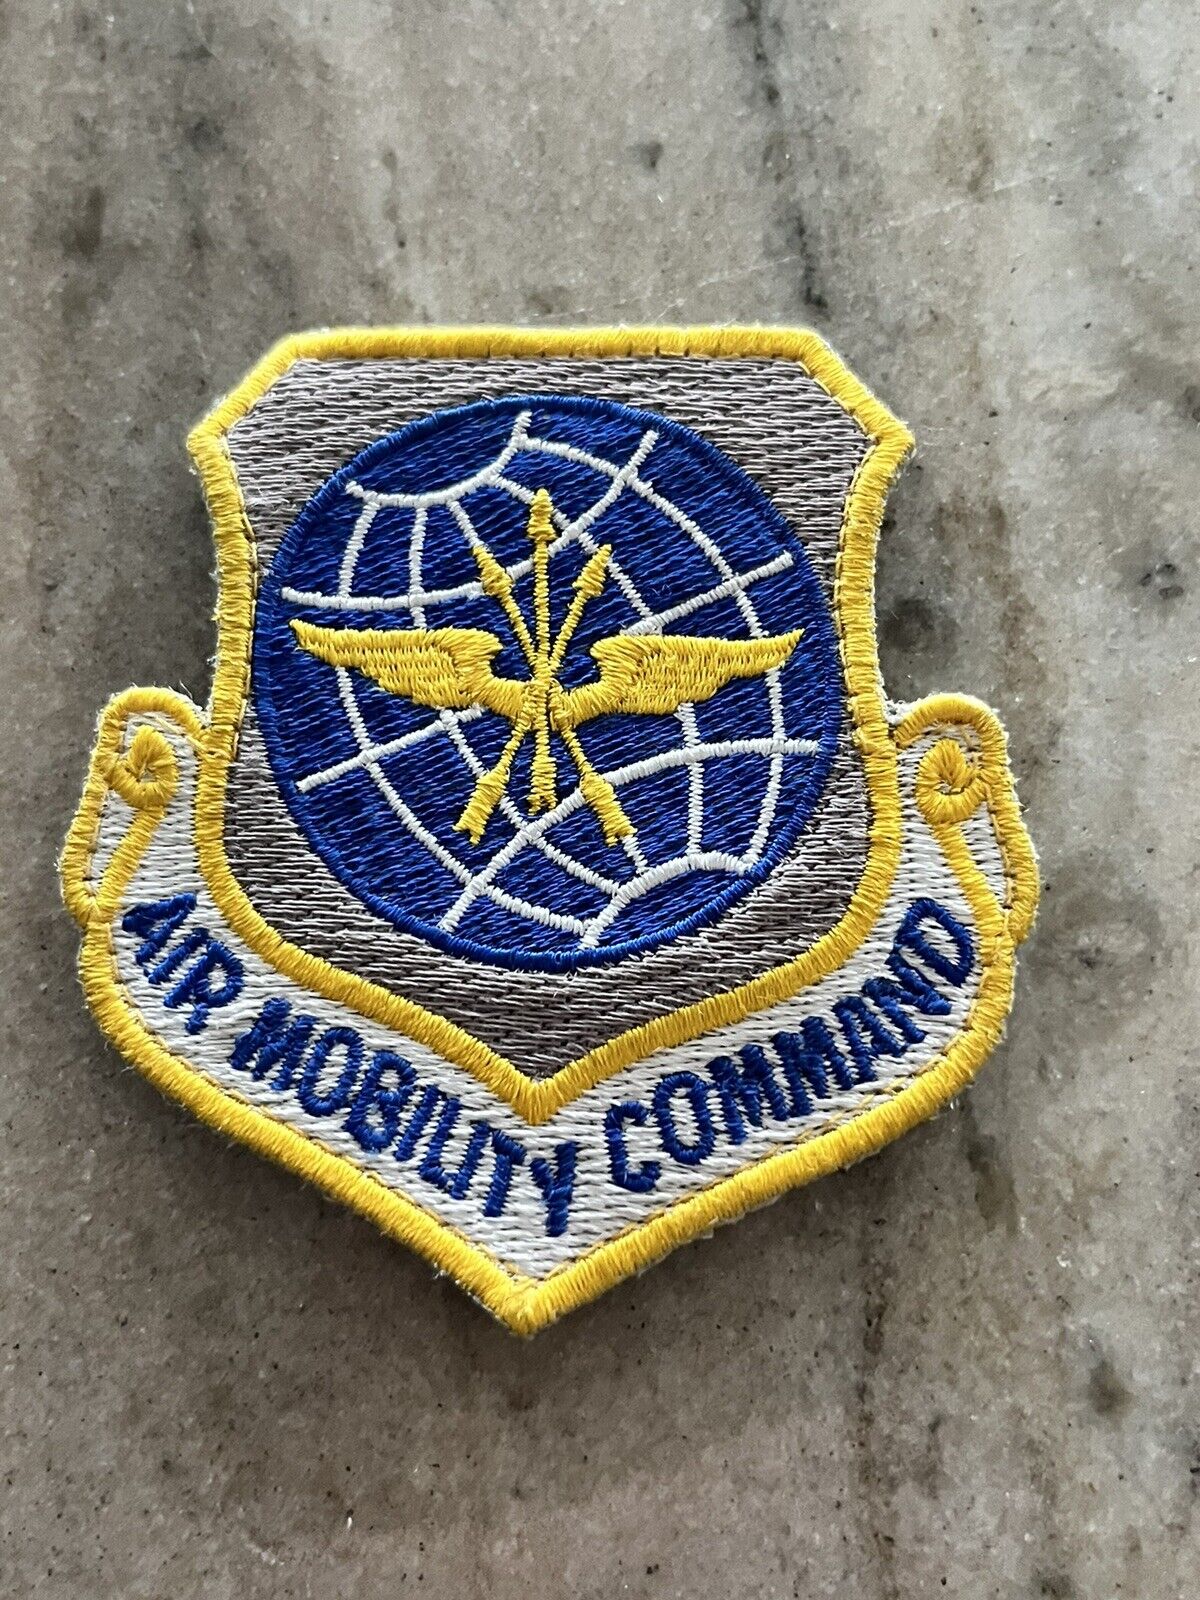 USAF AIR FORCE AIR MOBILITY COMMAND Patch - BRAND NEW - 